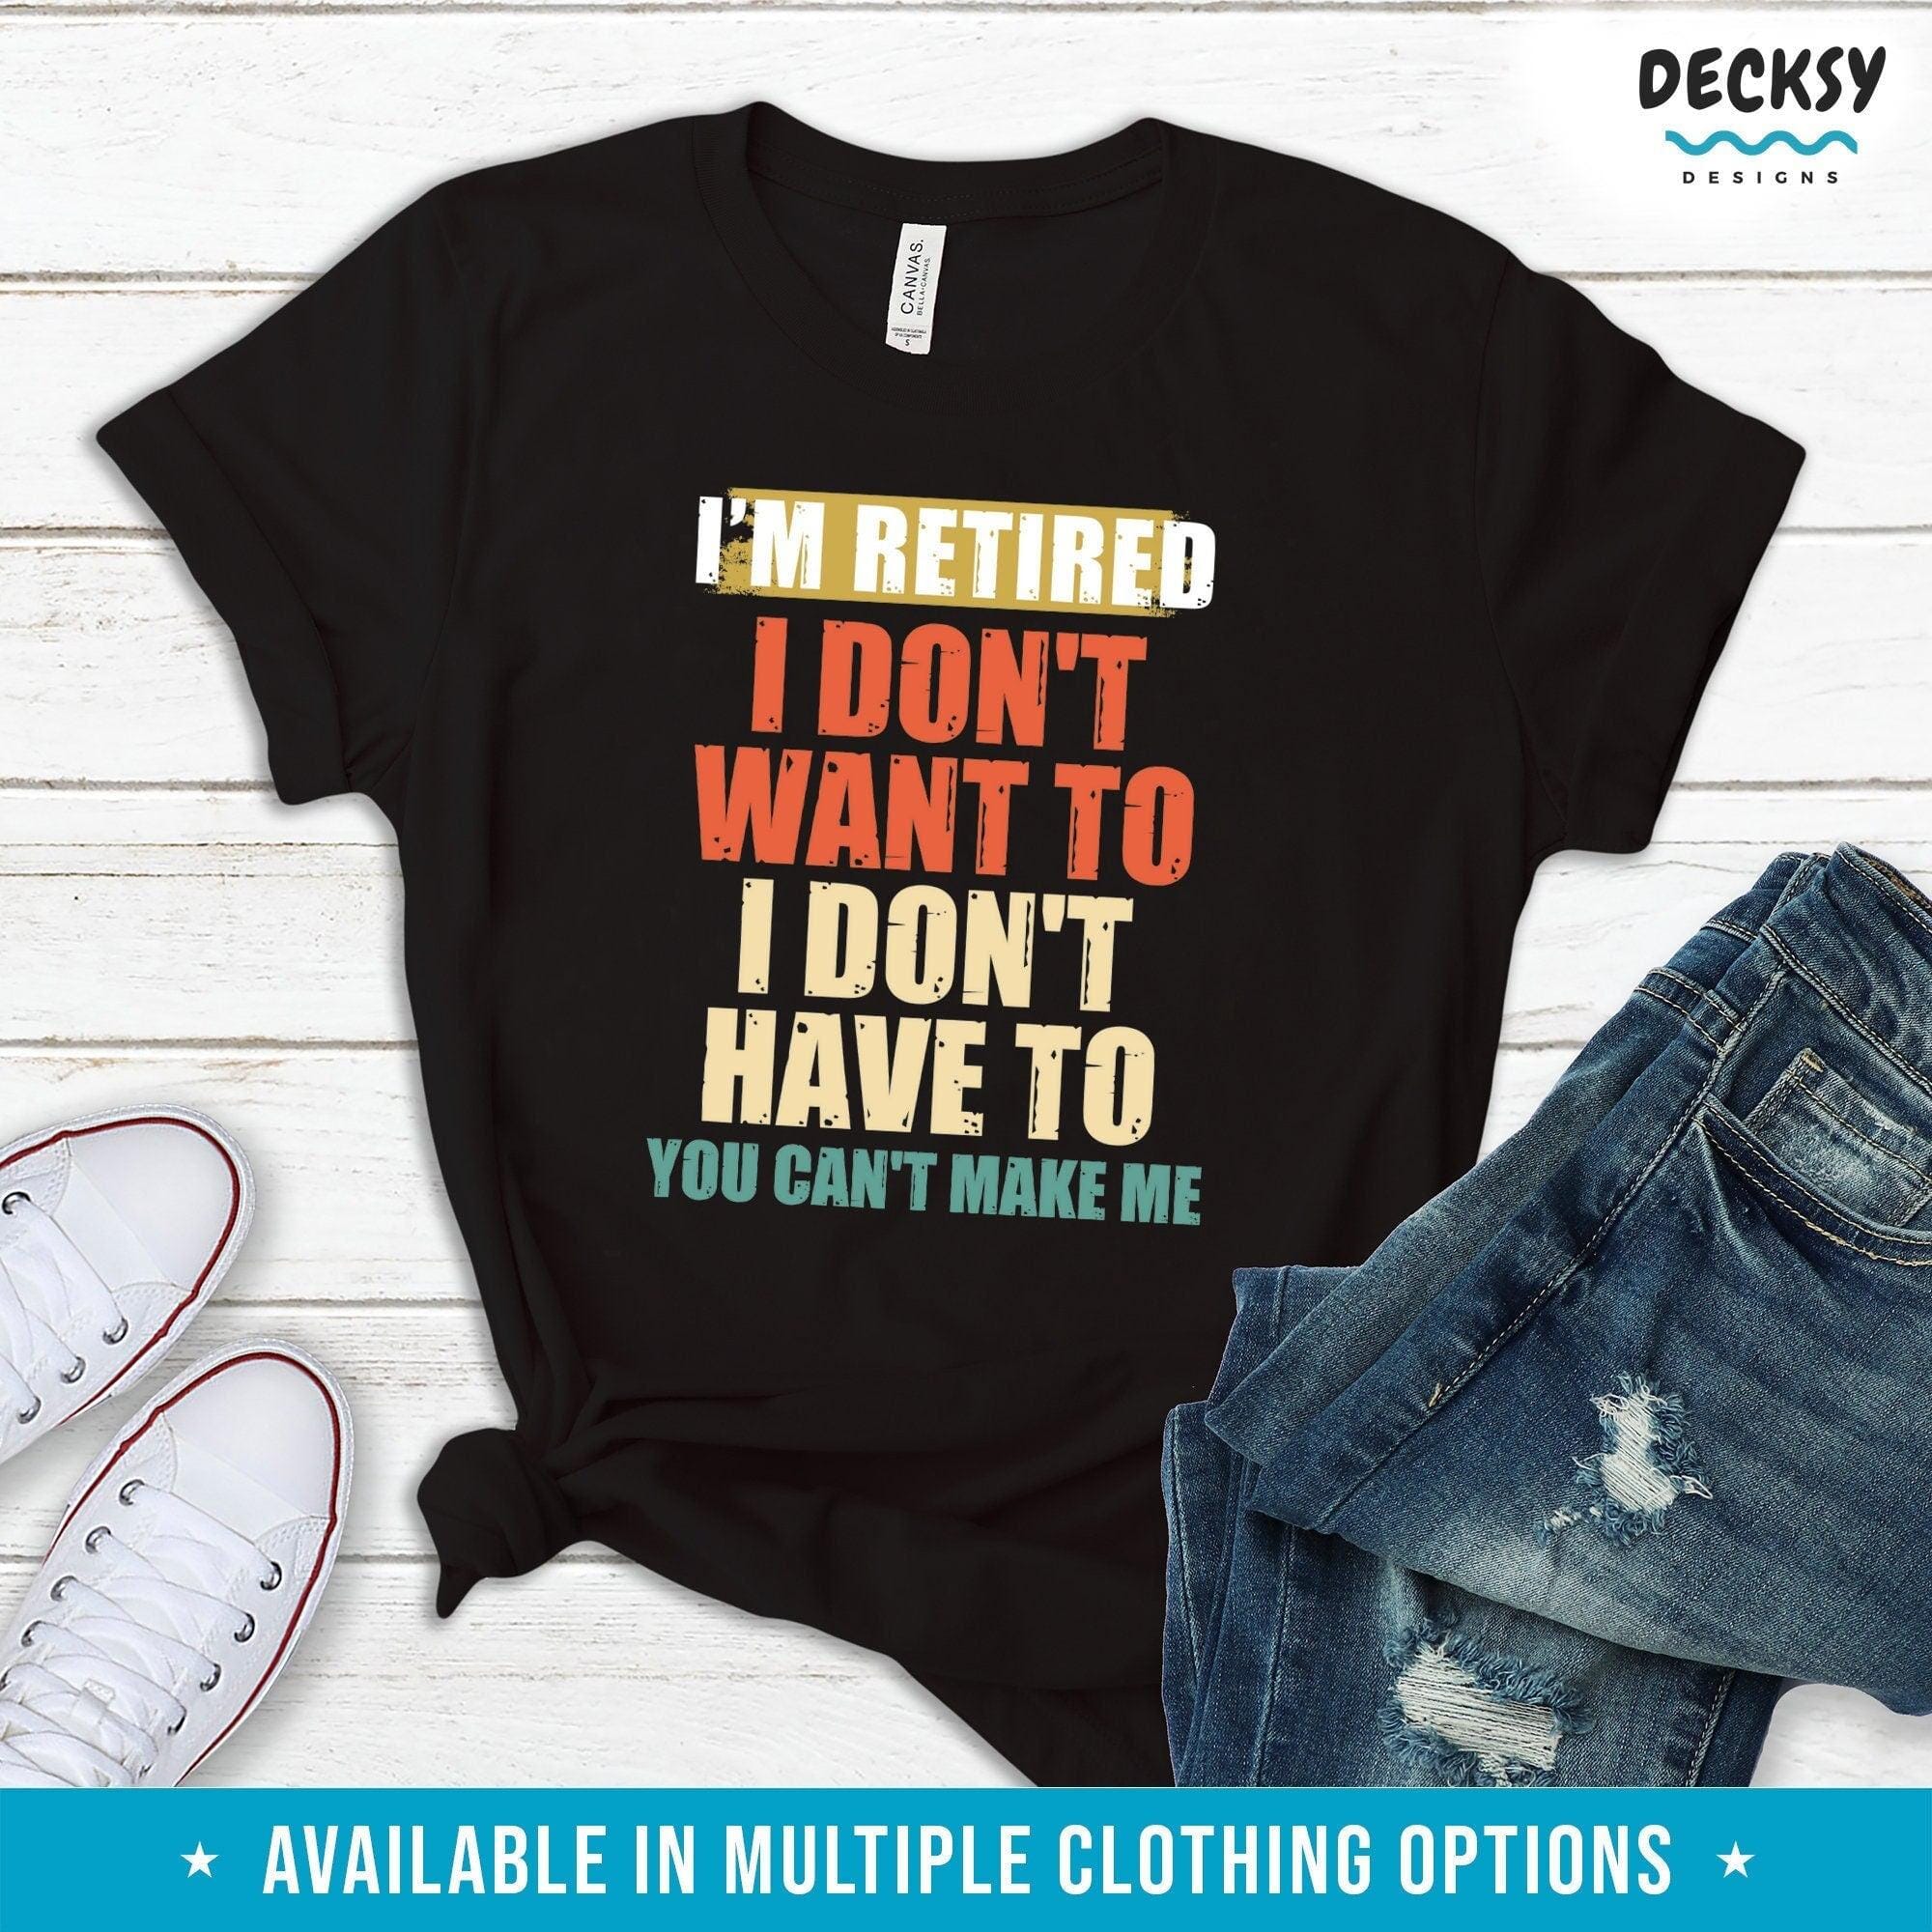 Retirement Shirt, Funny Retirement Party Gift-Clothing:Gender-Neutral Adult Clothing:Tops & Tees:T-shirts:Graphic Tees-DecksyDesigns